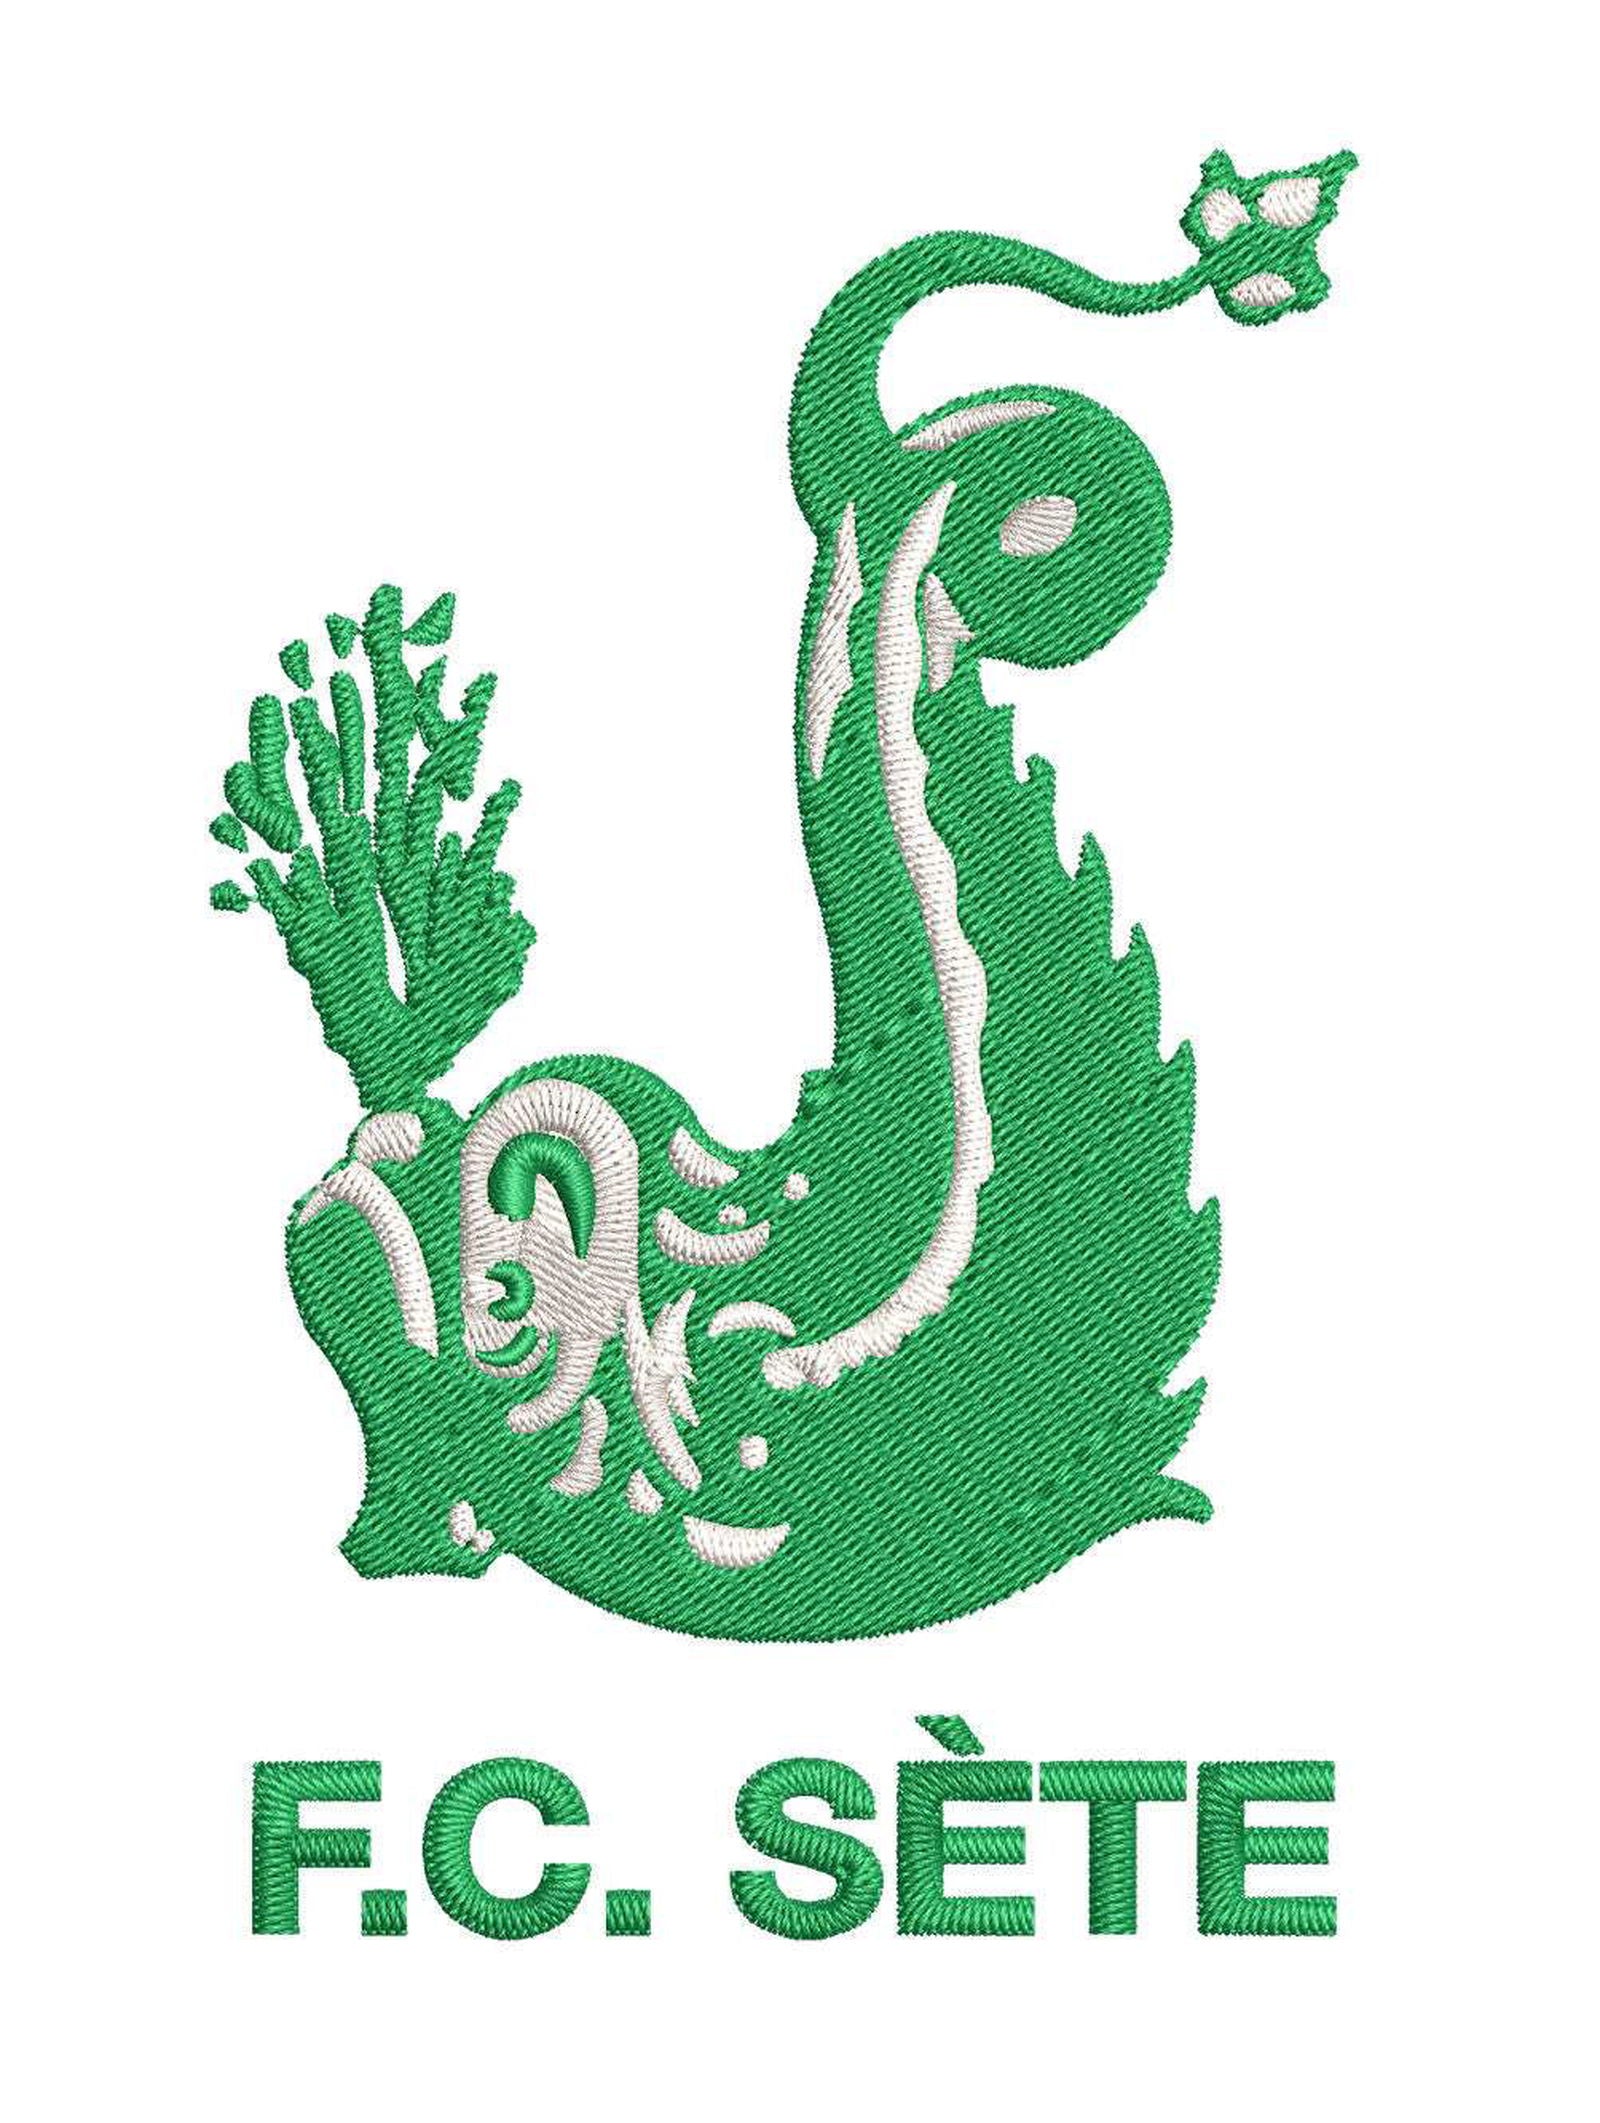 FC Sete Football Team: Embroidery Design - FineryEmbroidery